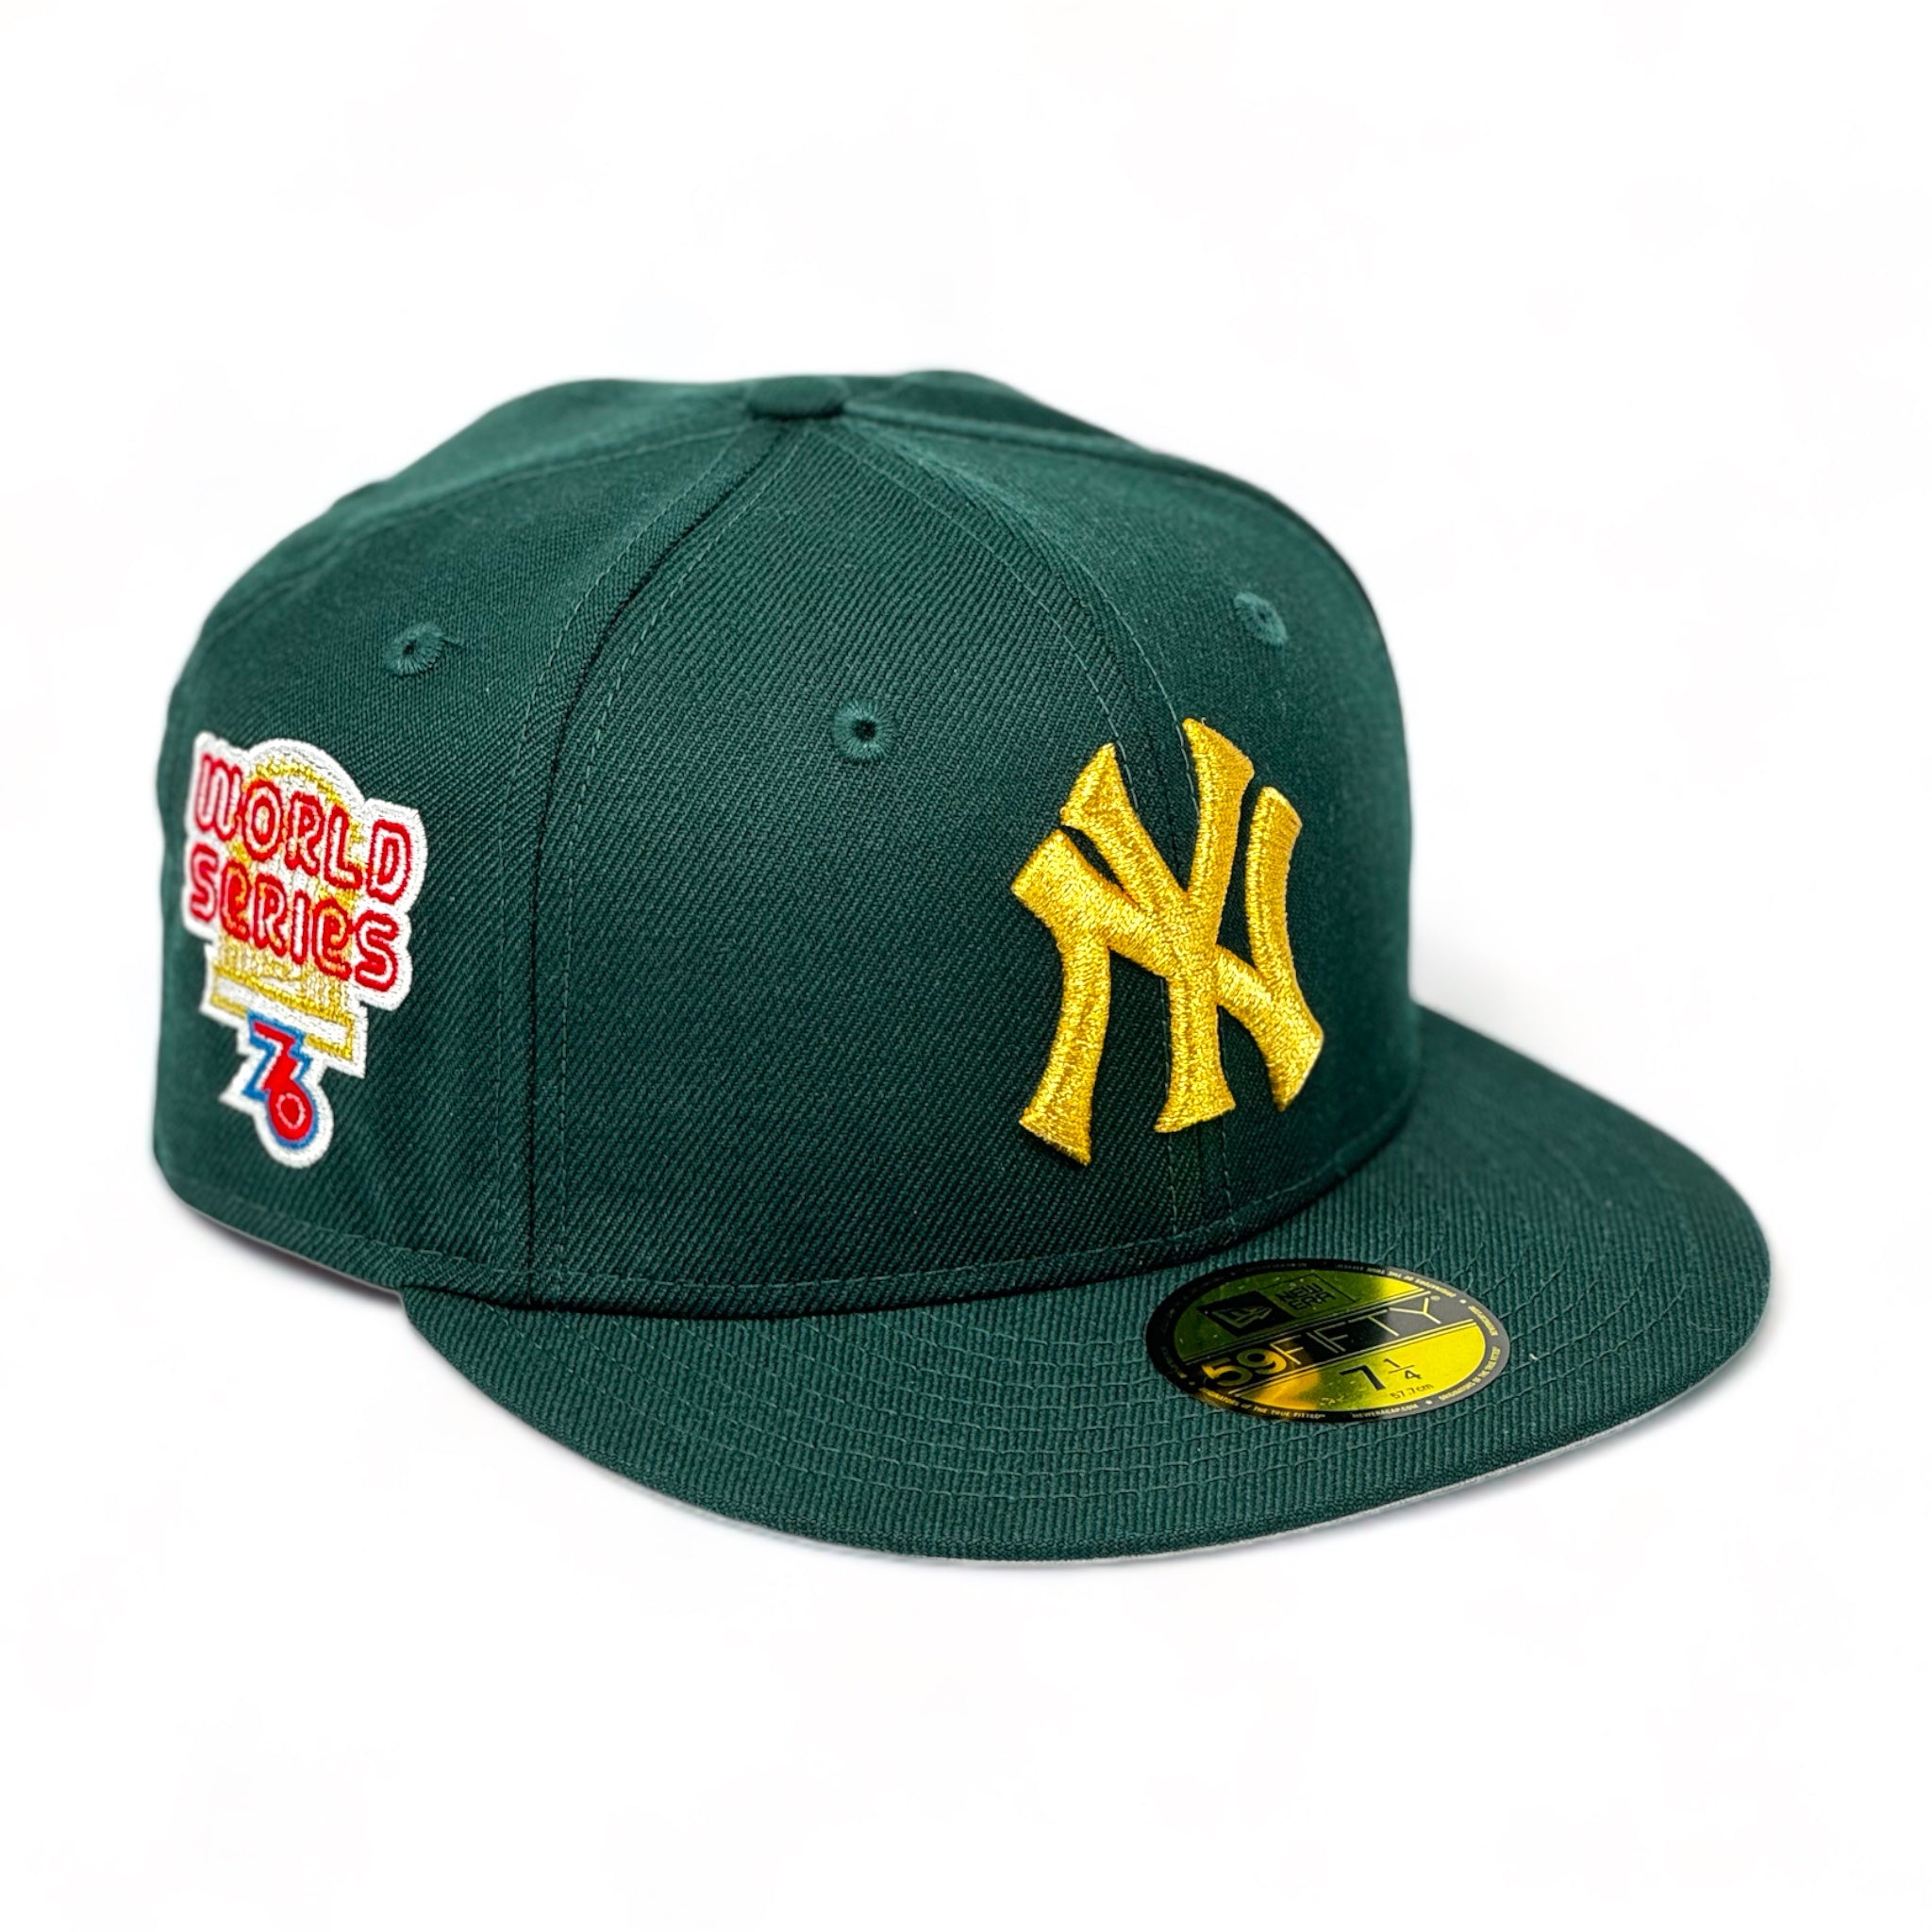 NEW YORK YANKEES (DK GREEN) (1976 WORLDSERIES) NEW ERA 59FIFTY EXCLUSIVE FITTED